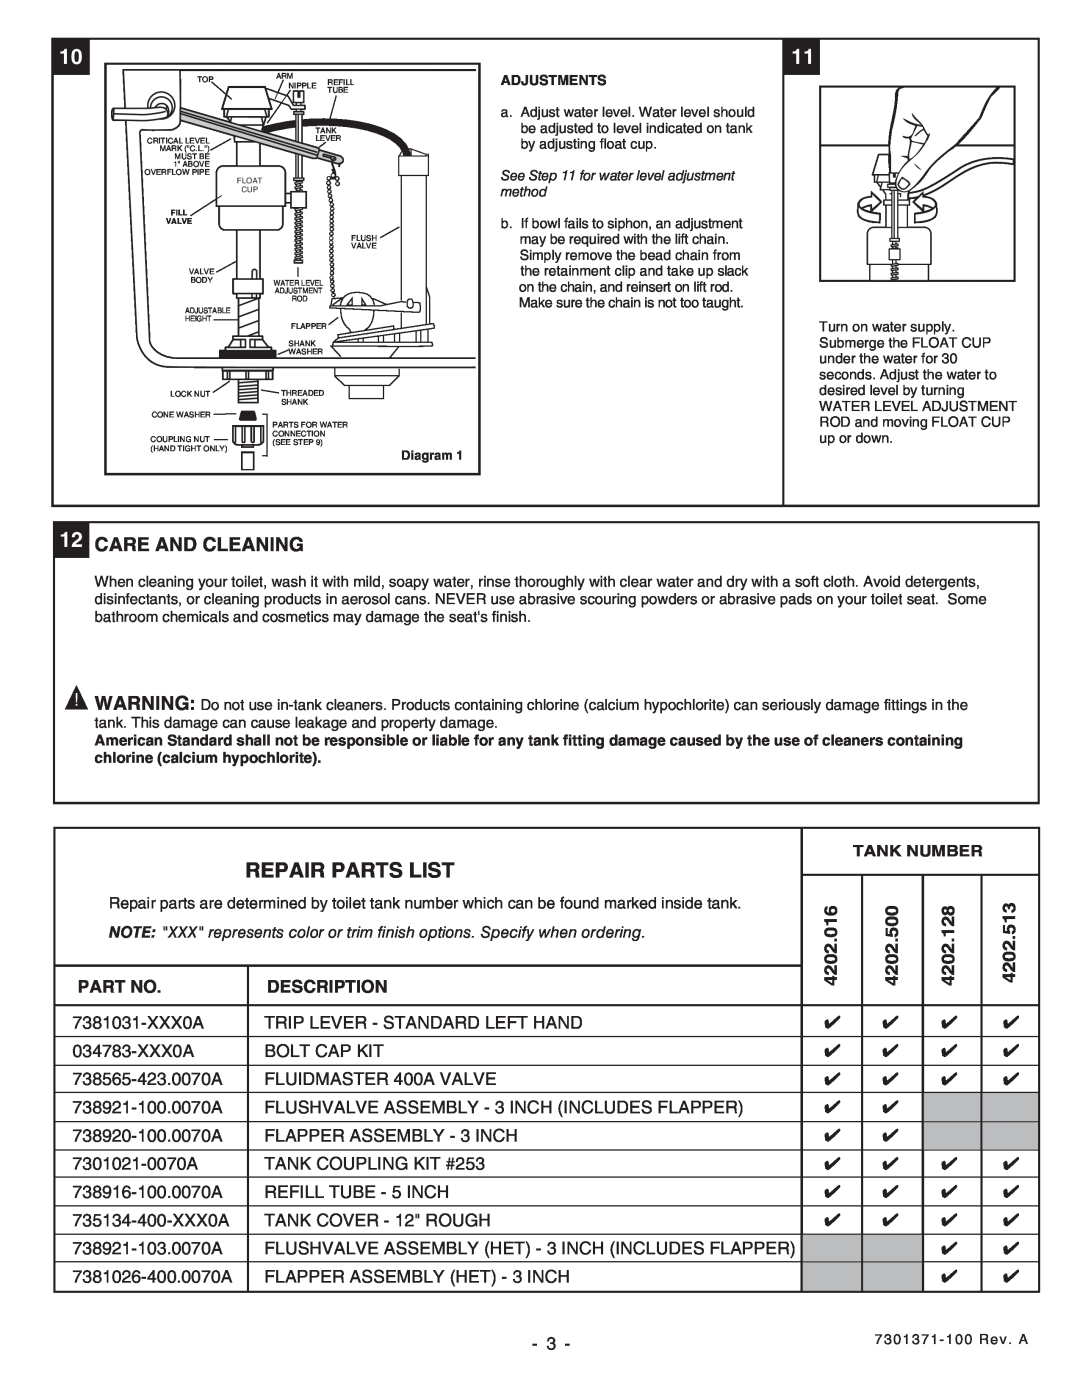 American Standard 2589, 2587 Repair Parts List, 12CARE AND CLEANING, 4202.016, 4202.500, 4202.128, 4202.513, Description 